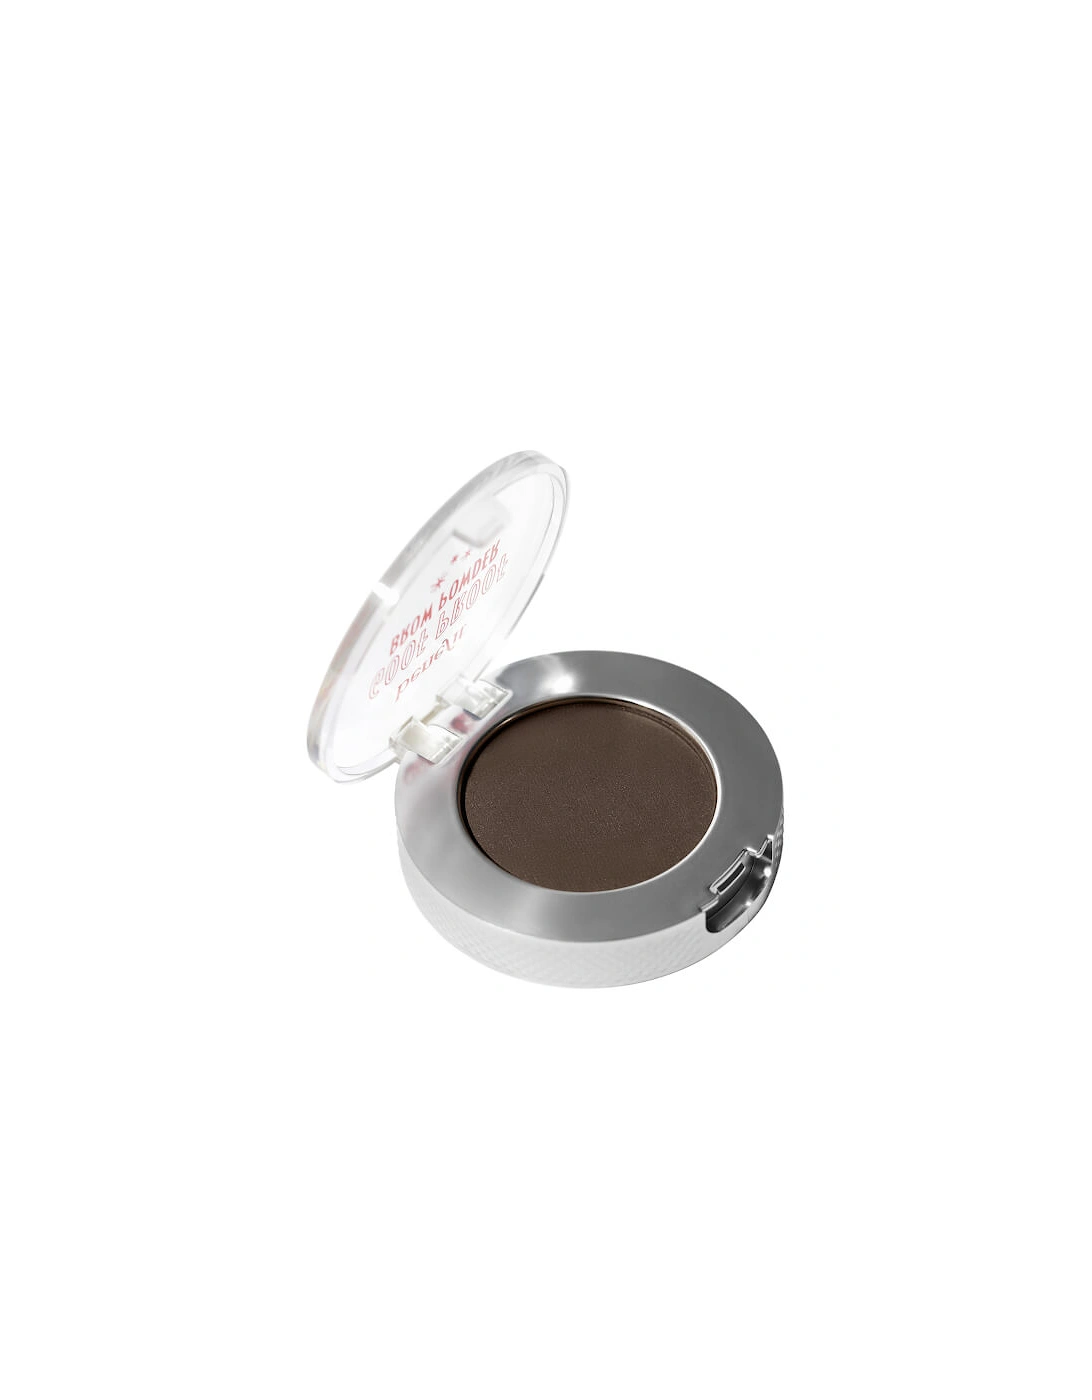 Goof Proof Easy Brow Filling Powder - 4.5 Neutral Deep Brown, 2 of 1